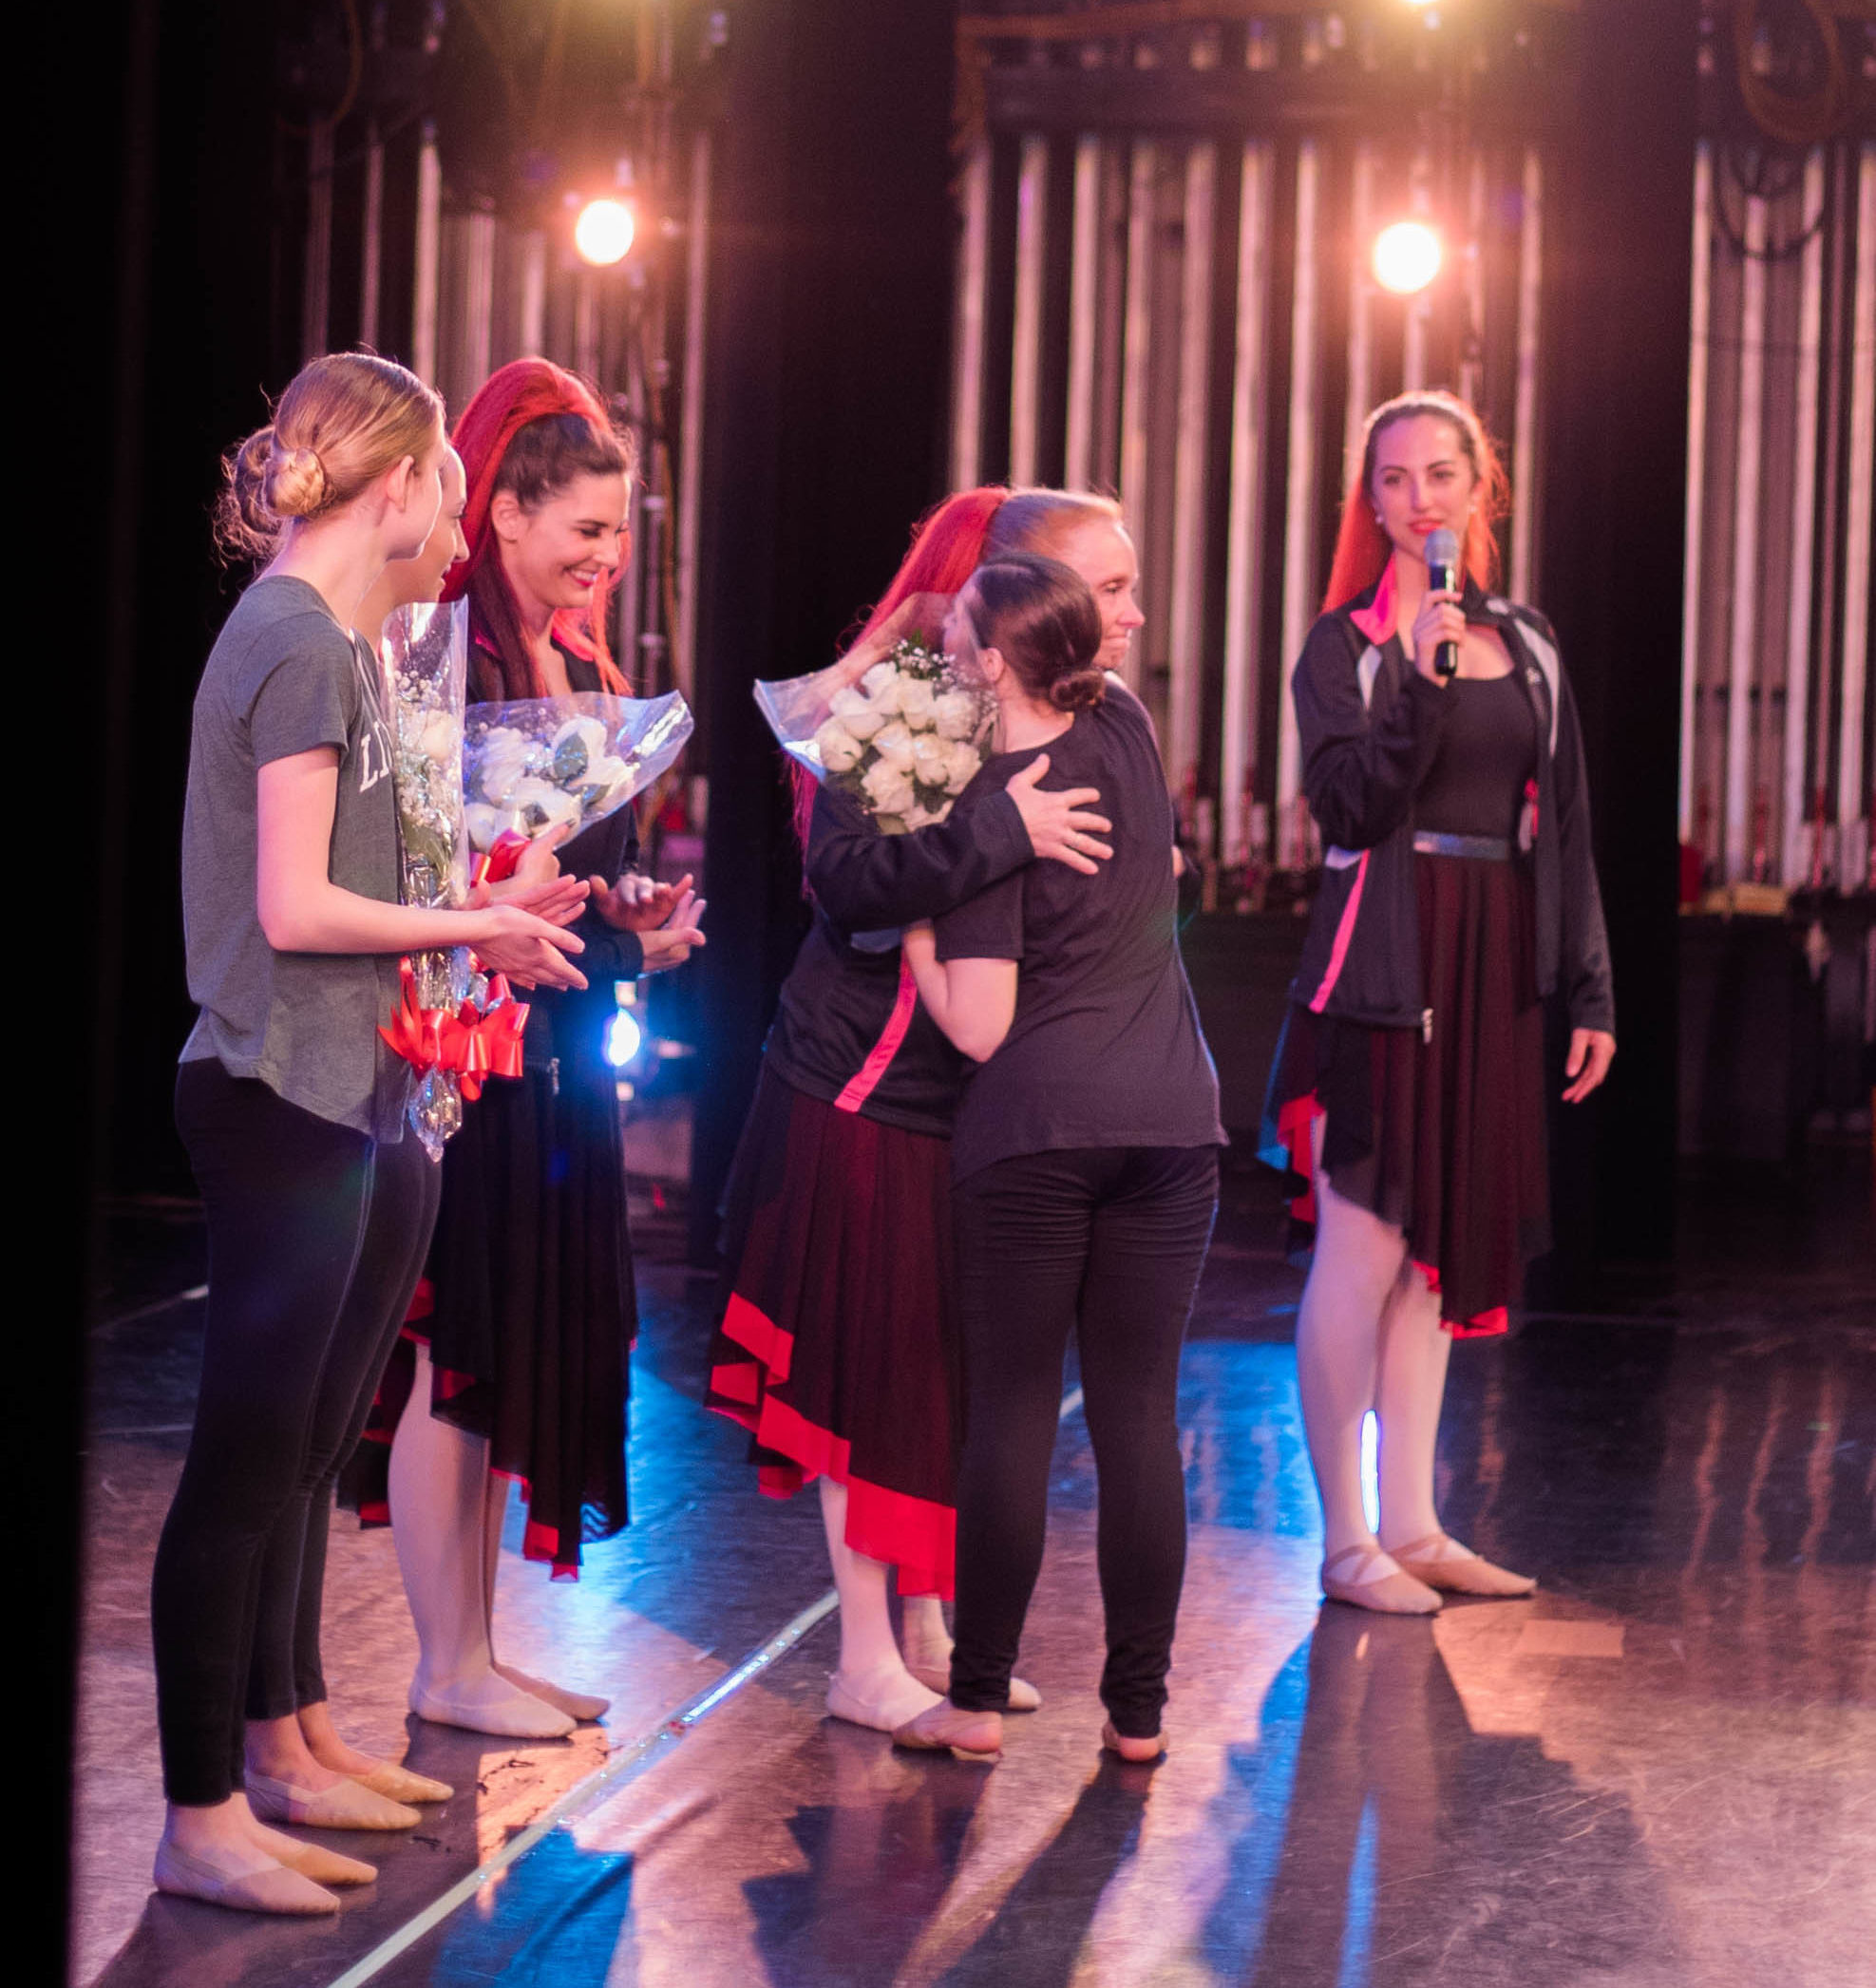 Four dance teachers, in costume from performing, hand out flowers to senior dancers at the end of a recital. They are onstage, with stage lights shining on them, and one student hugs a teacher.